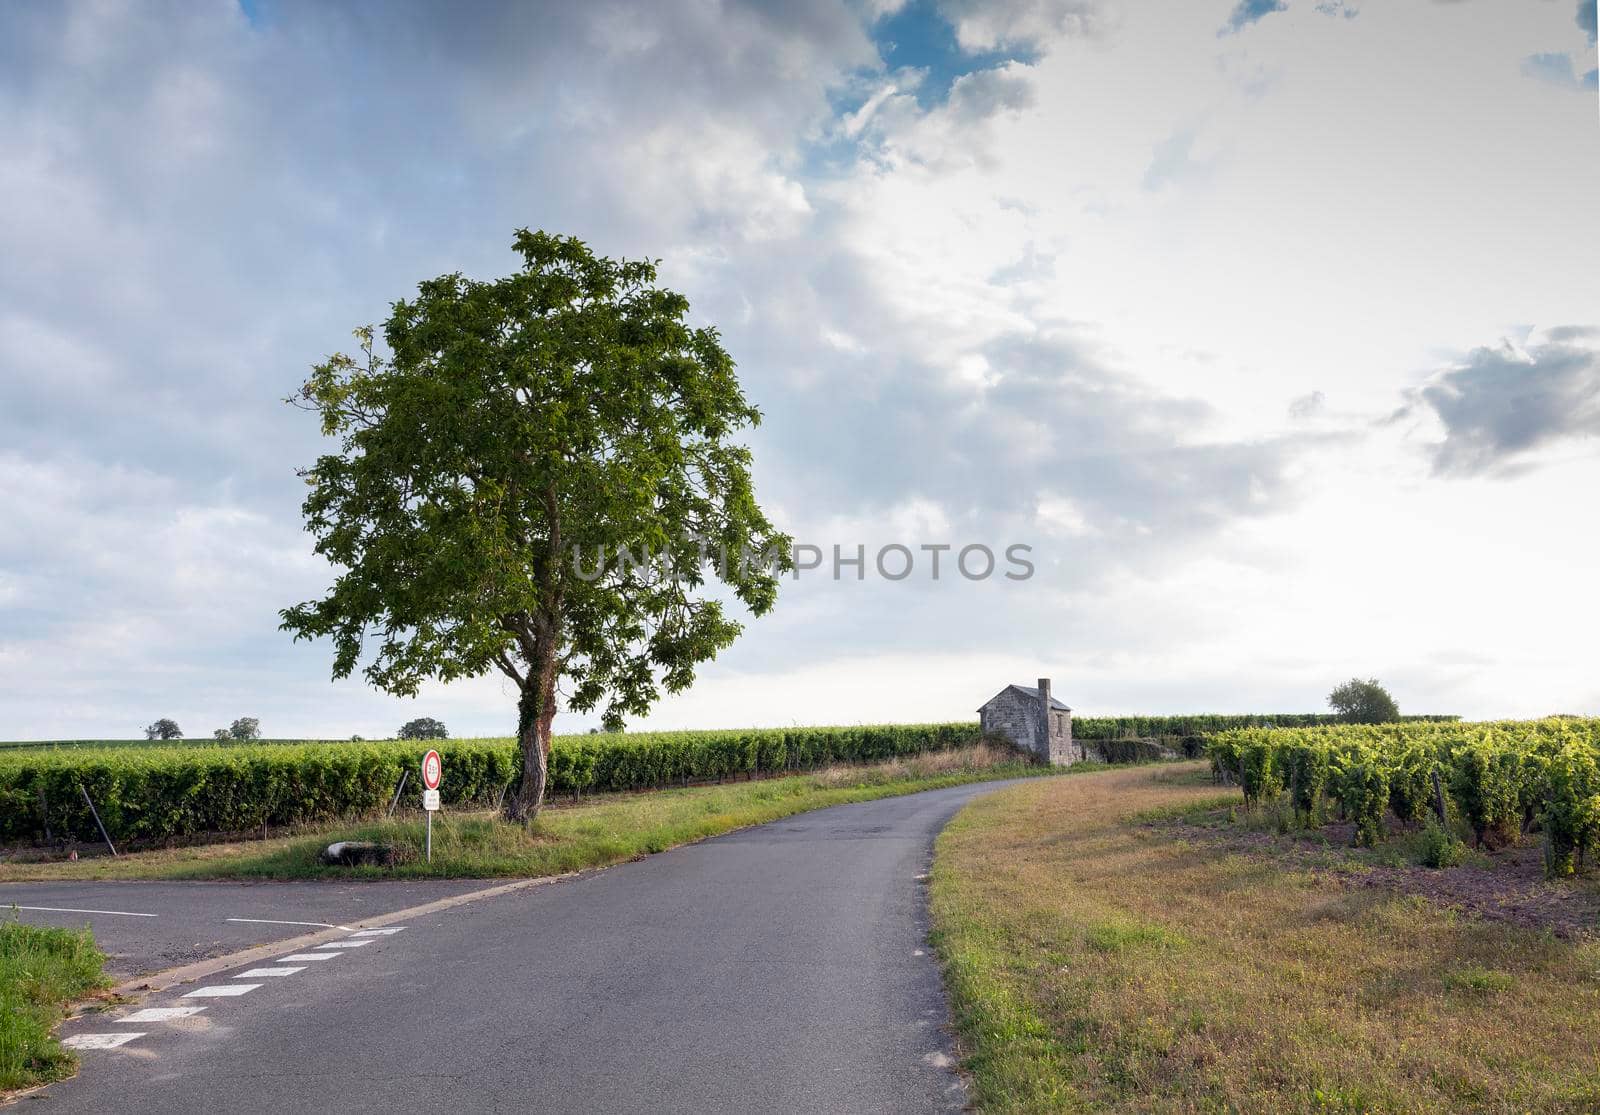 blue summer sky over vineyards and old stone walls in Parc naturel regional Loire-Anjou-Touraine near river loire in france